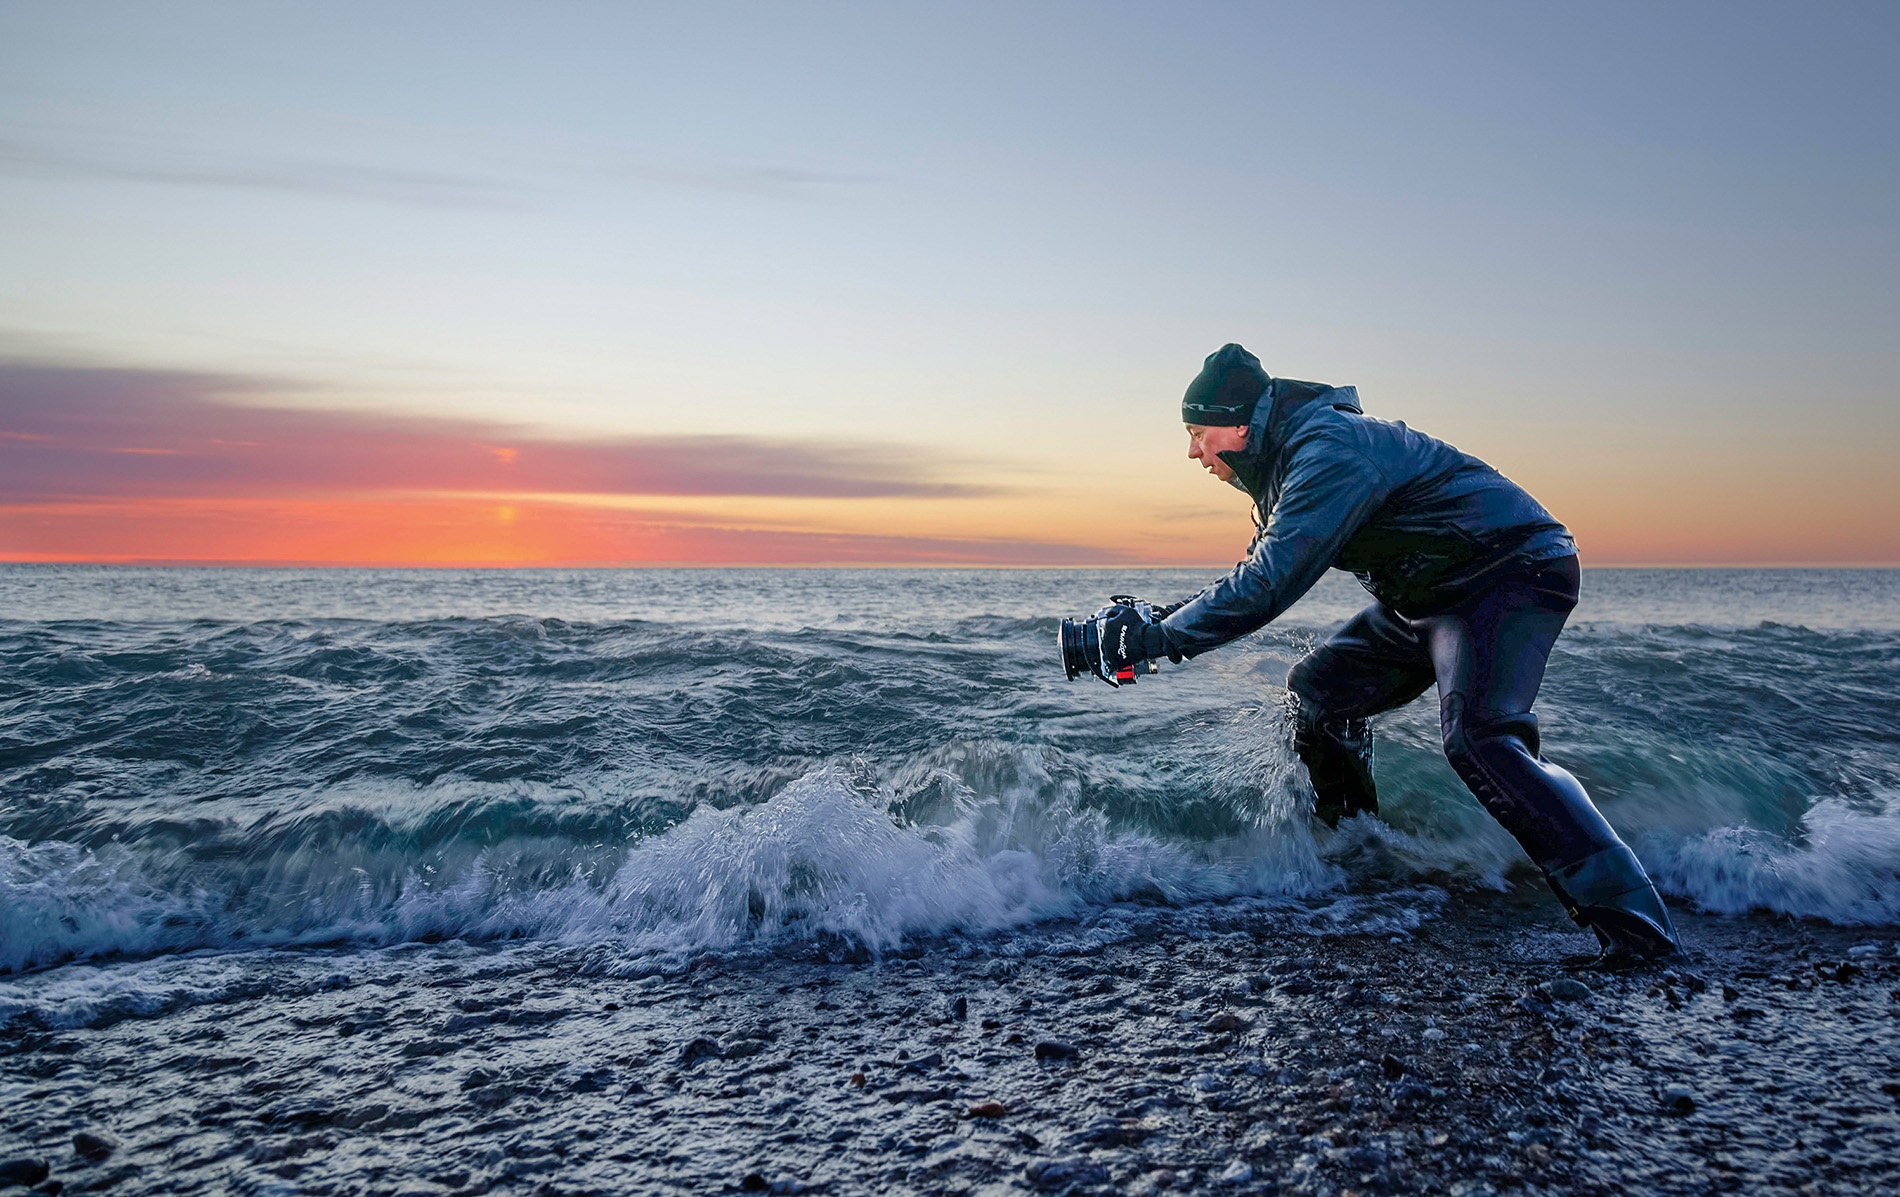 Image of Steven Koppel taking a photo in the surf.